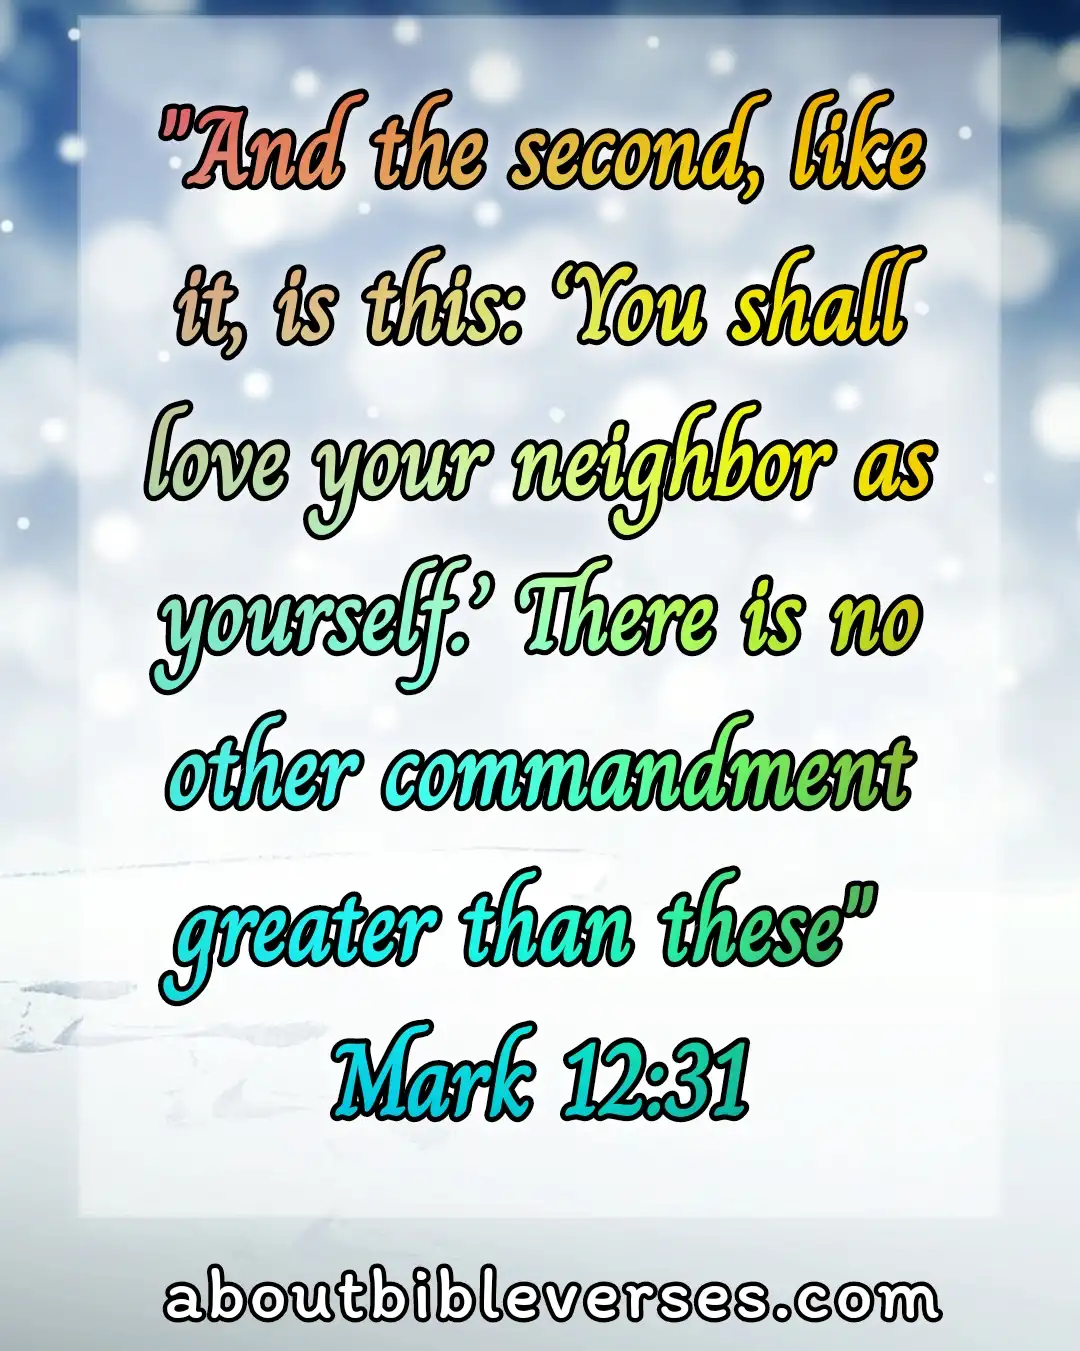 Bible Verses About Affection (Mark 12:31)